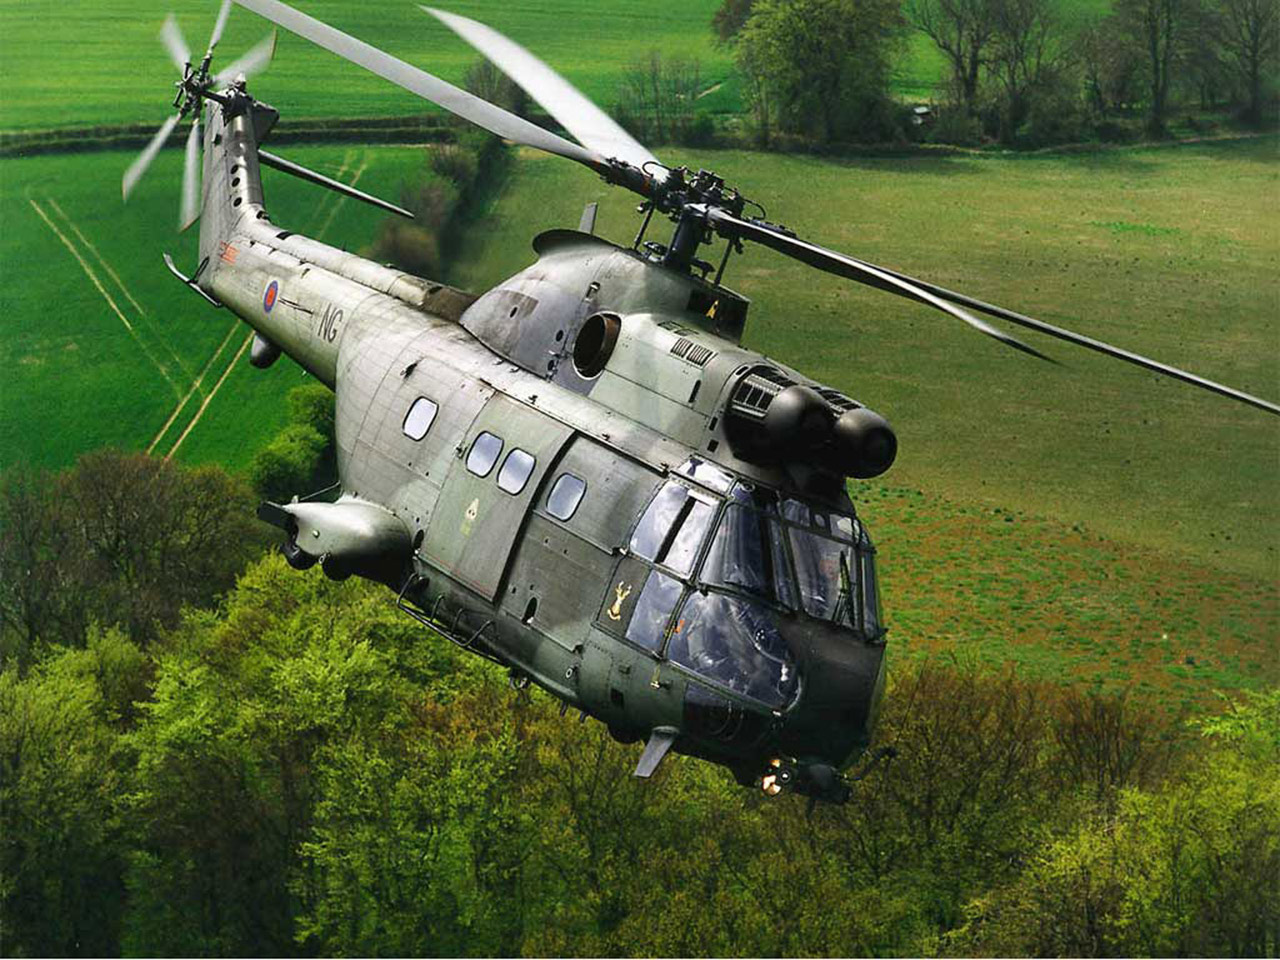  wallpaperPuma Helicopter Army and Navy Wallpaper 1280x960